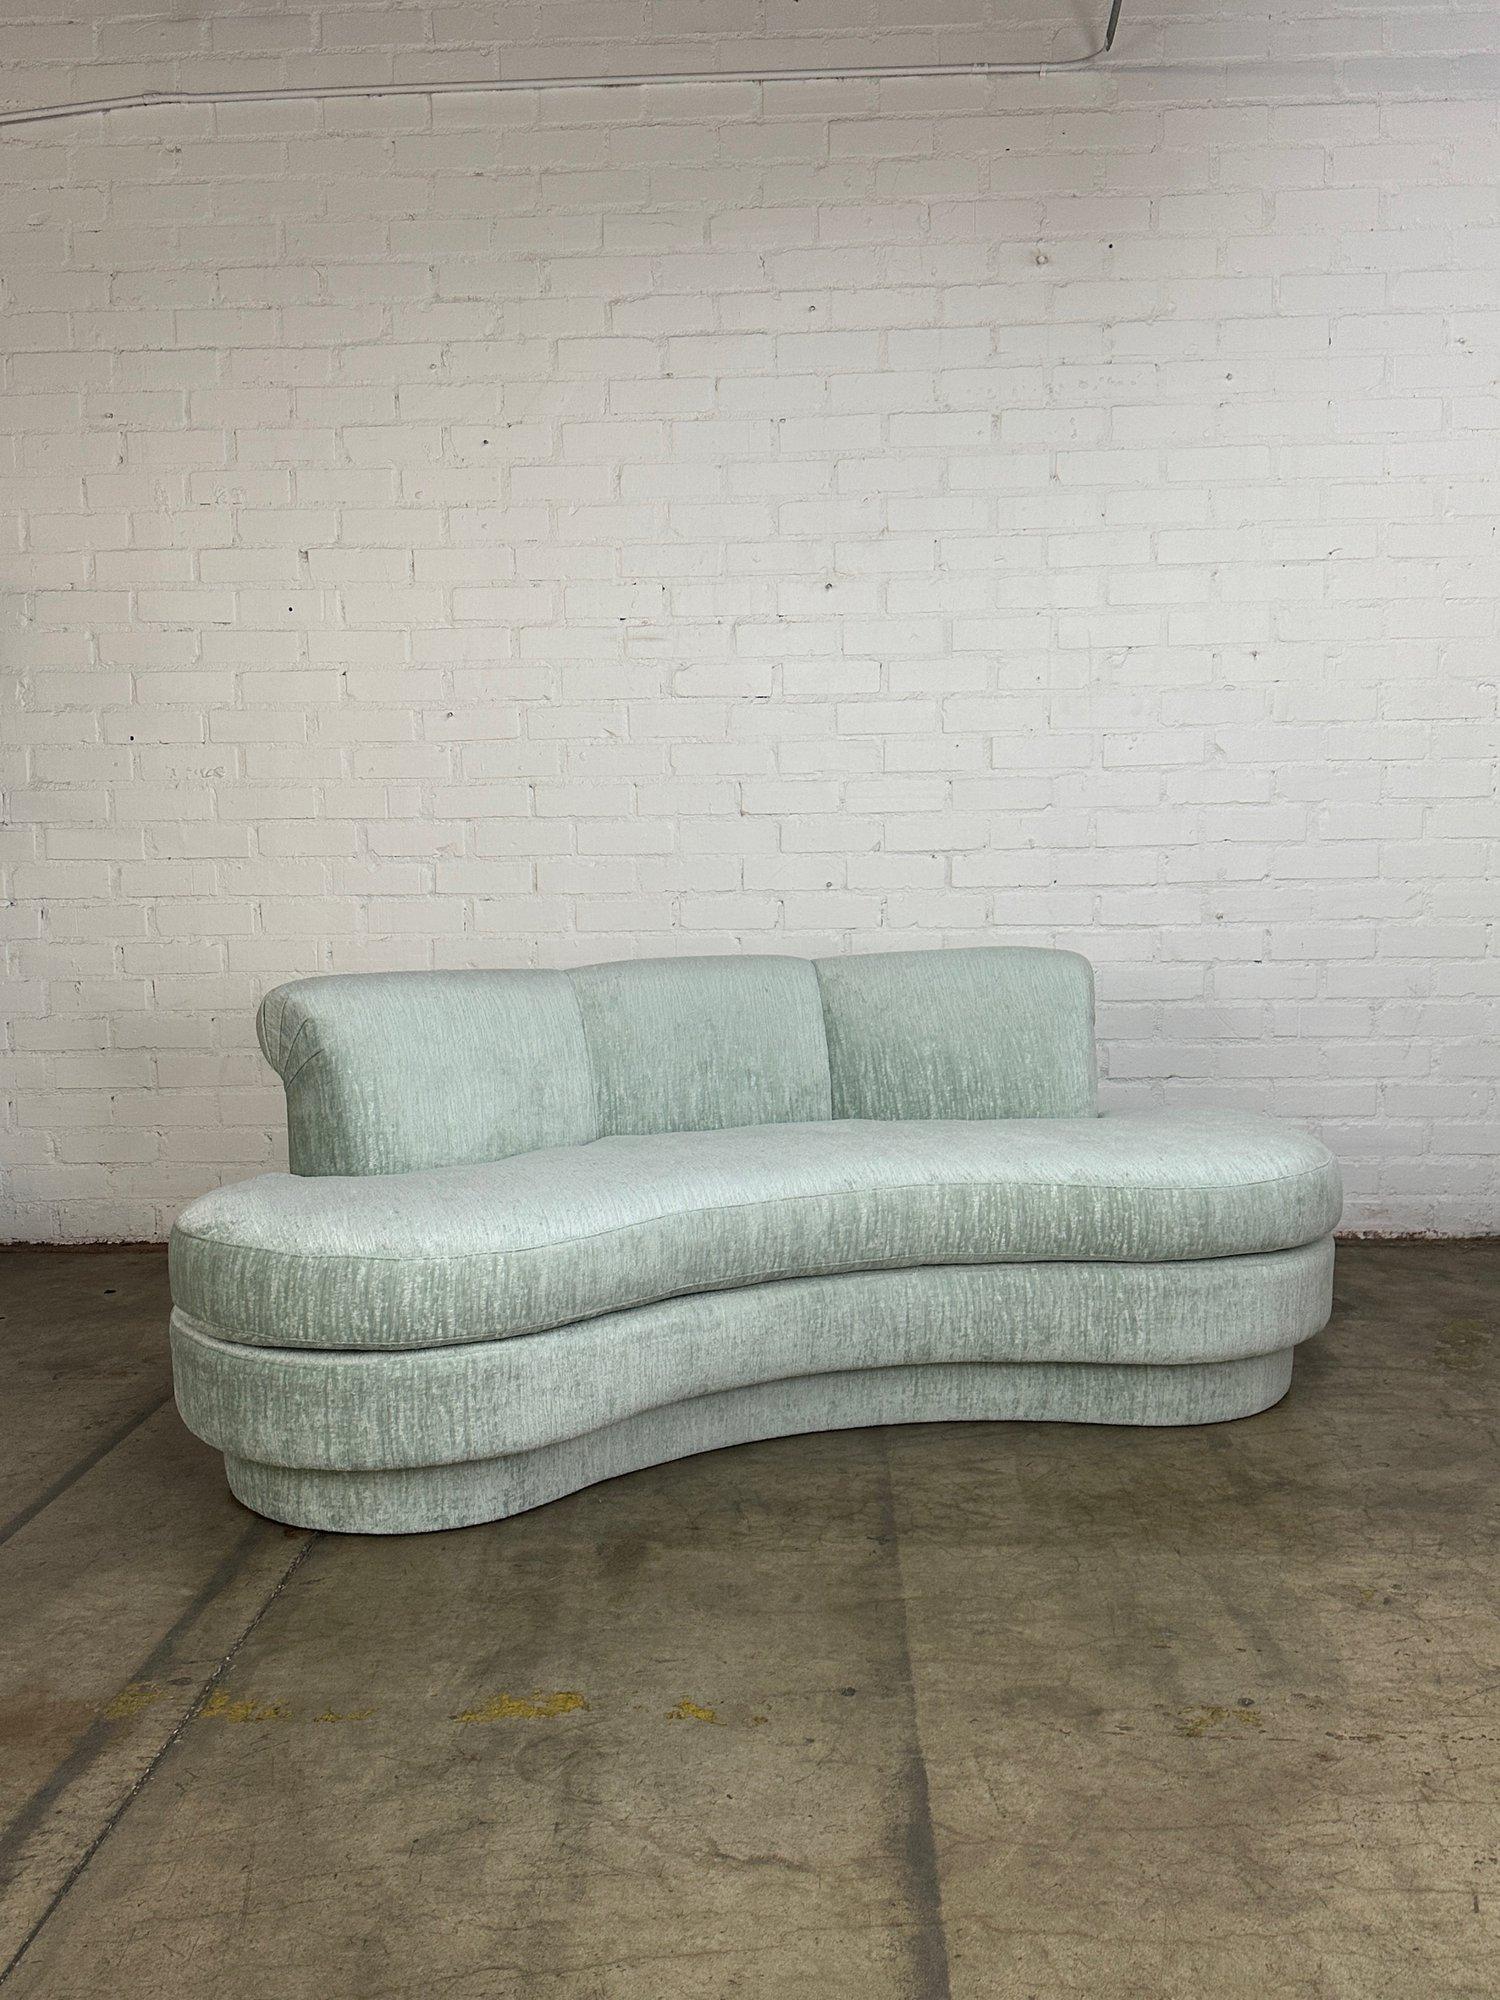 W85 D38 H31 SH20 SW82.5 SD26 SH20

Post Modern Kidney Sofa with fresh foam and fresh textured chenille fabric. Item has two custom ball pillows in velvet. Item shows in excellent fully restored condtion with no areas of visible wear. 